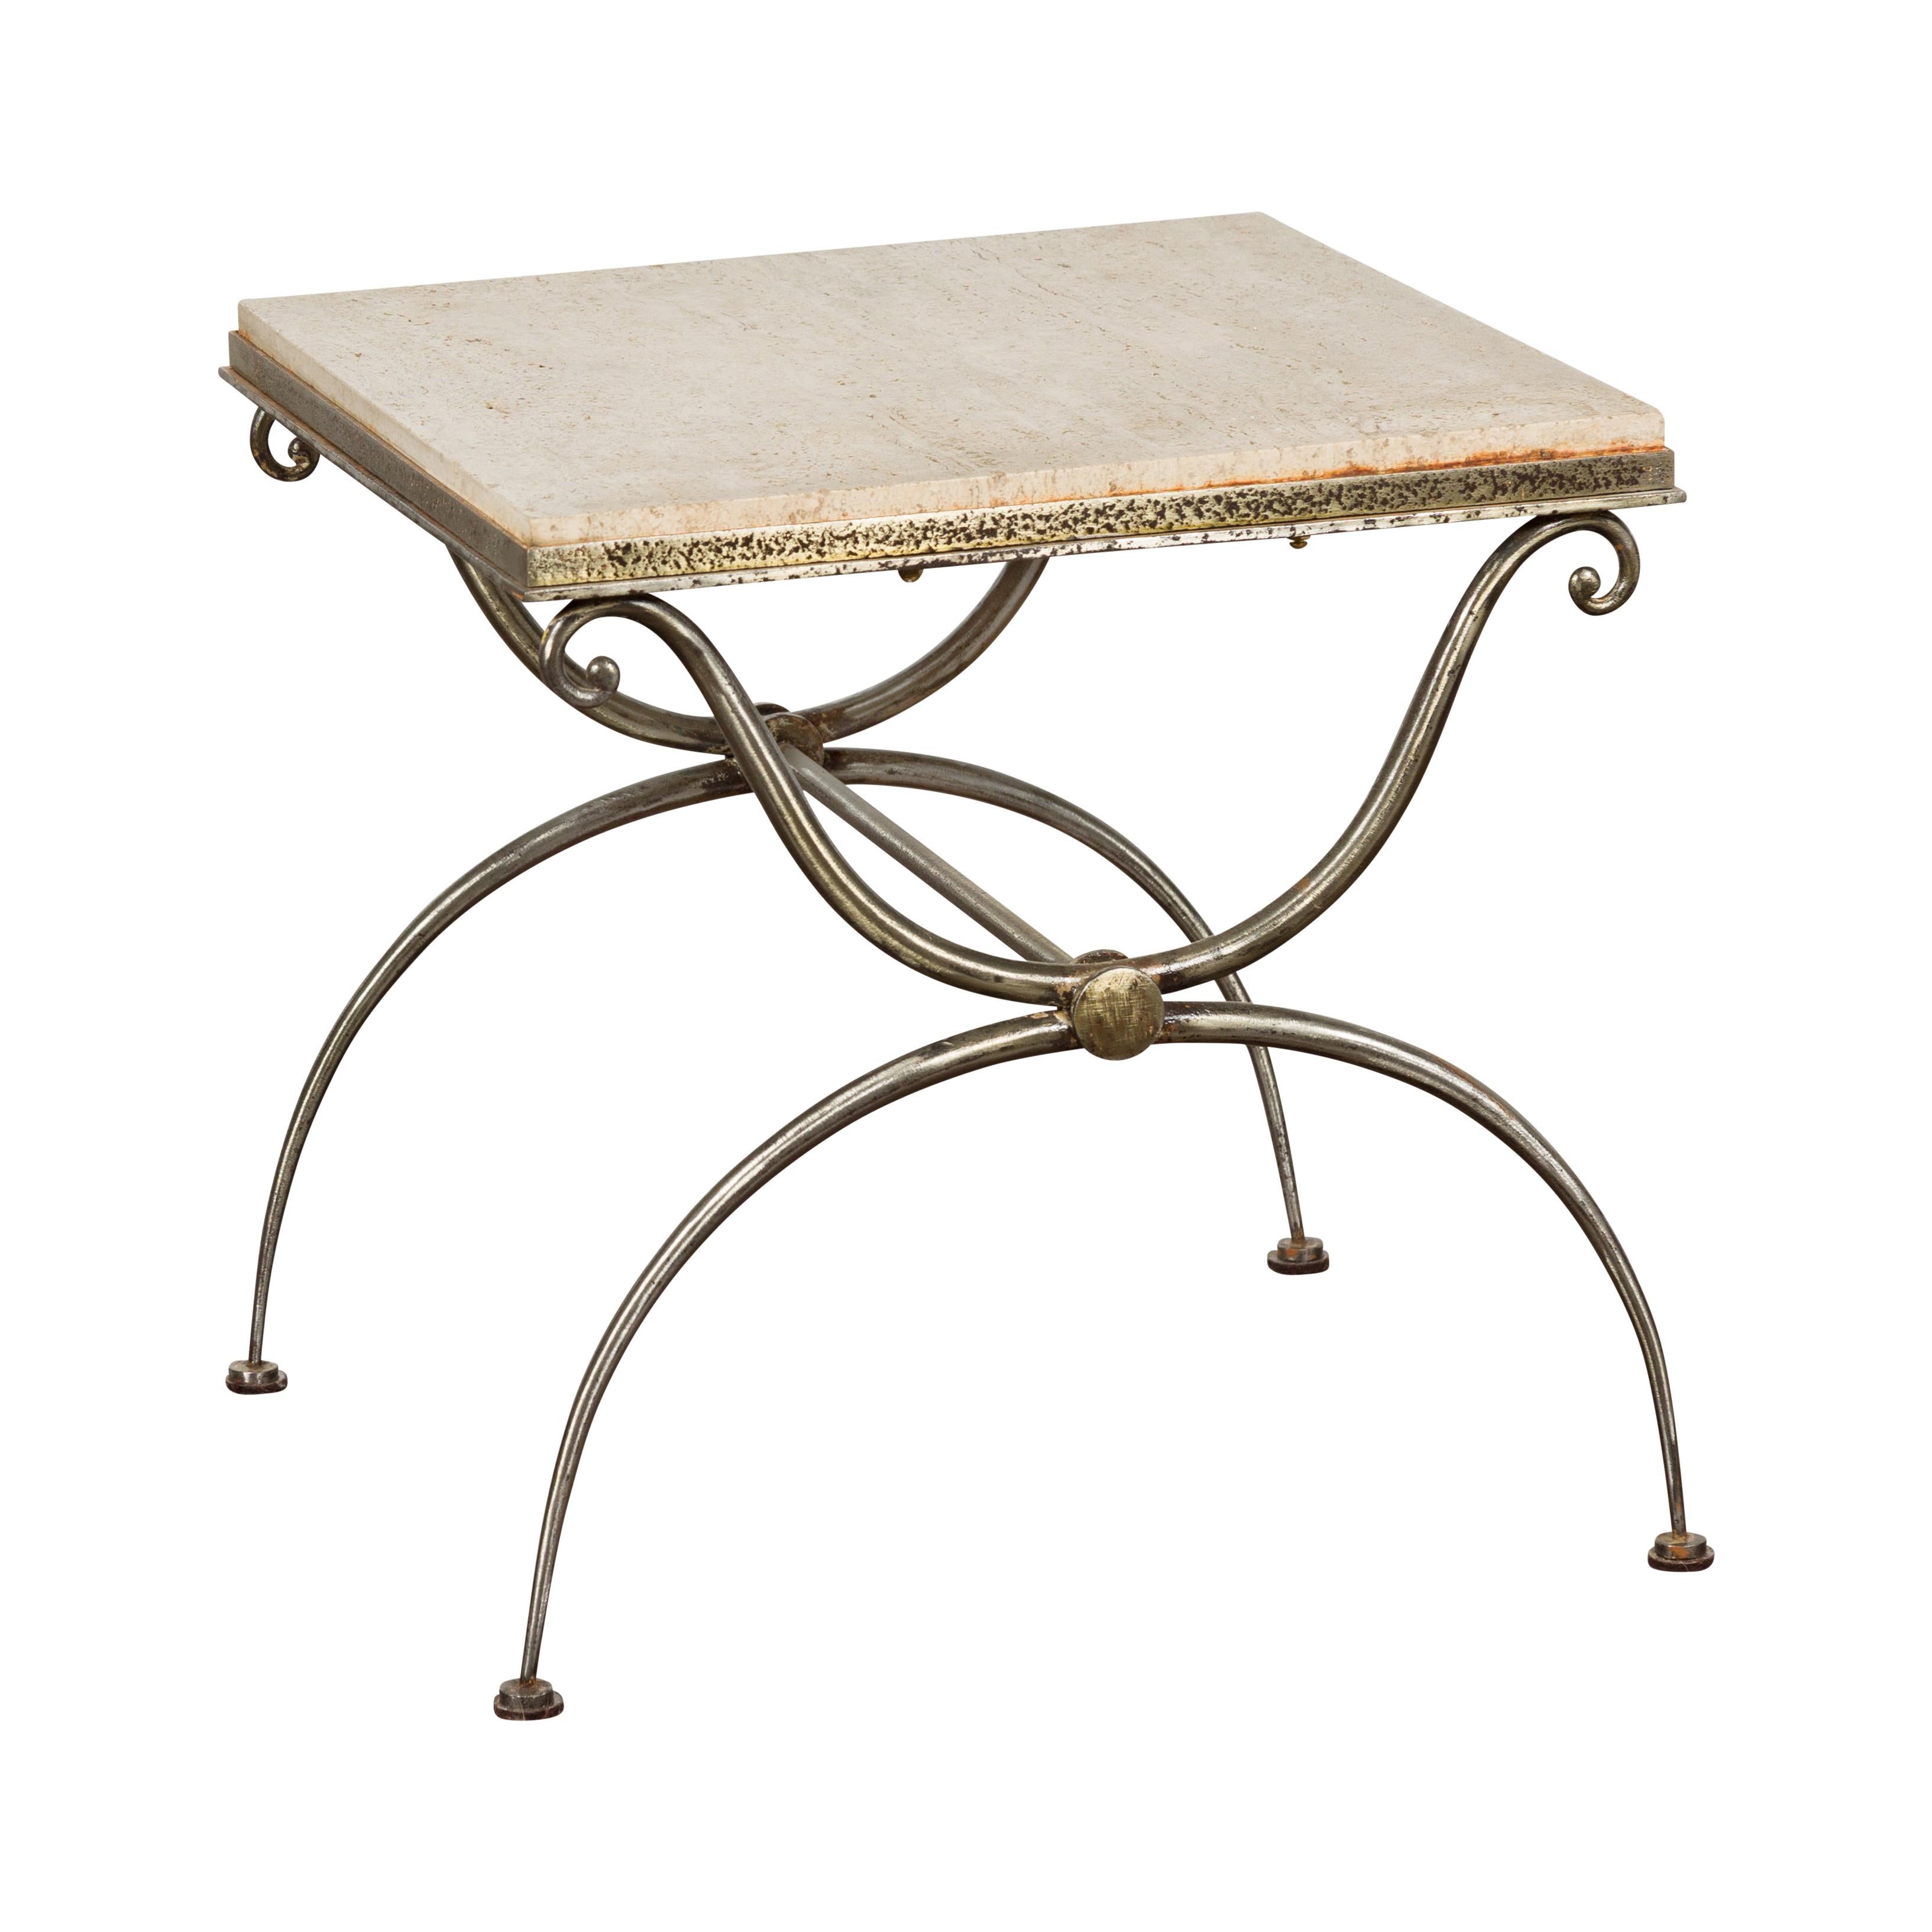 Midcentury French Steel Side Table with Marble Top and Scrolling Supports For Sale 9